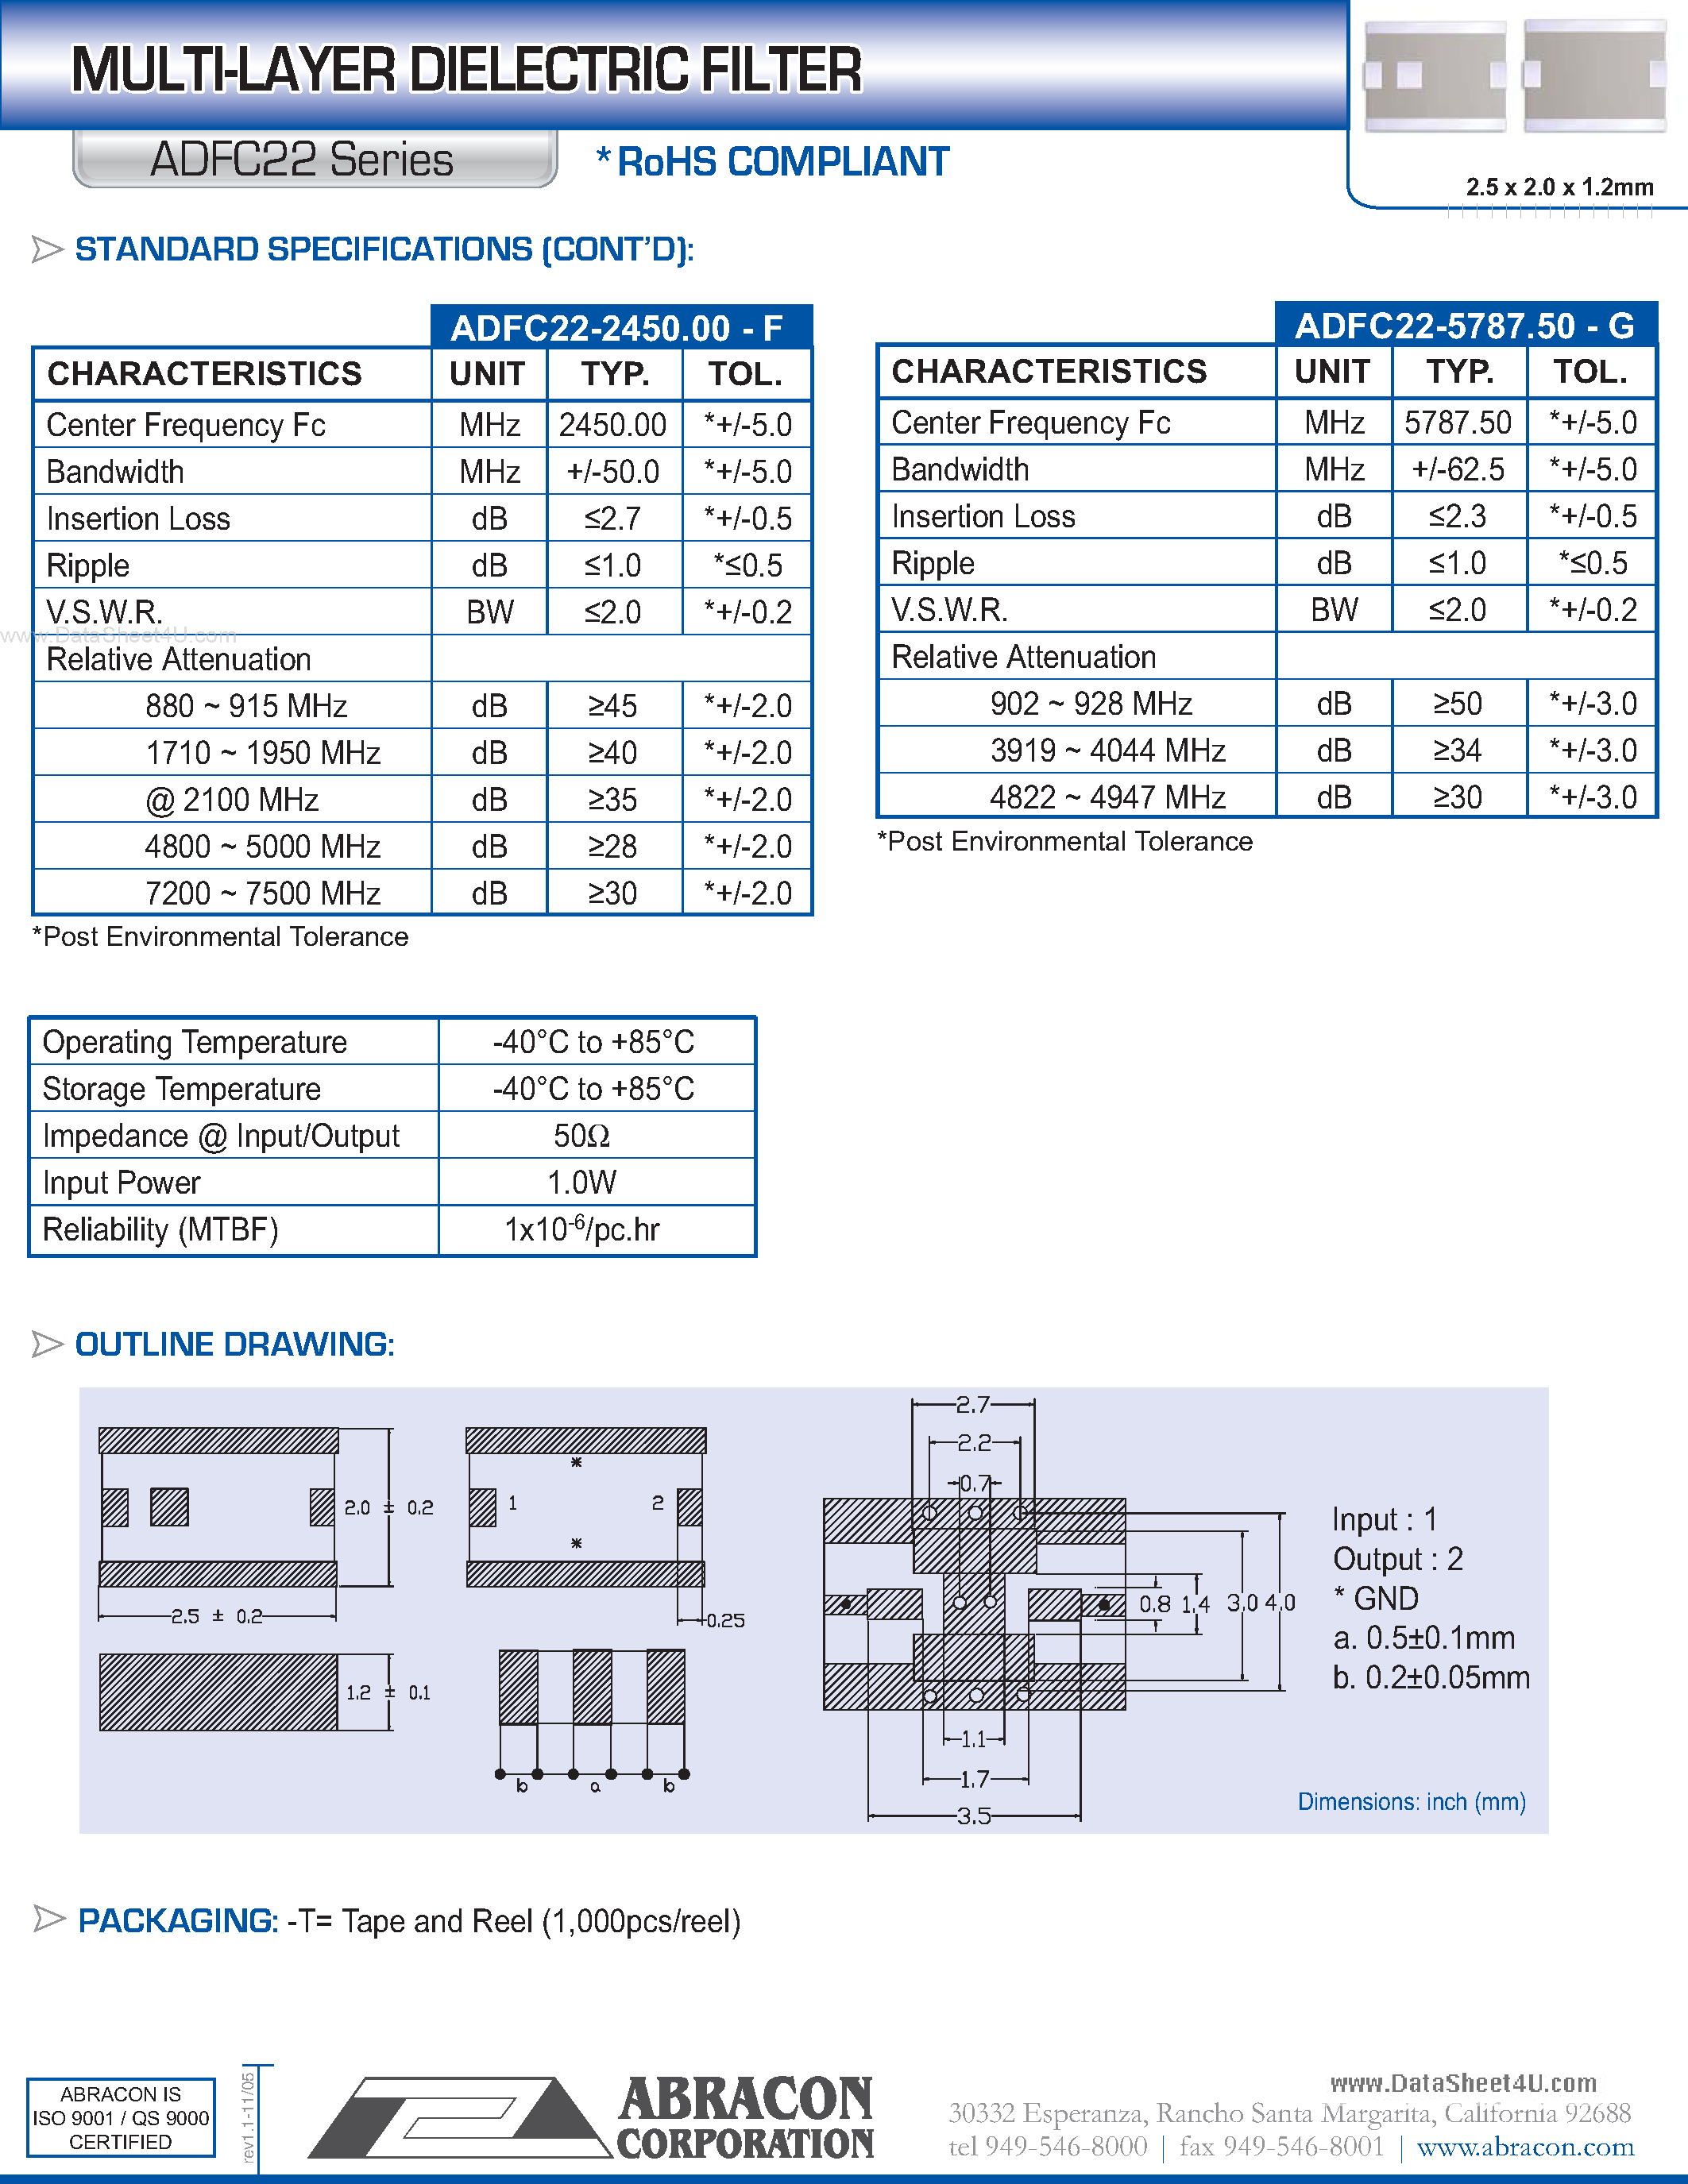 Datasheet ADFC22 - MULTI-LAYER DIELECTRIC FILTER page 2